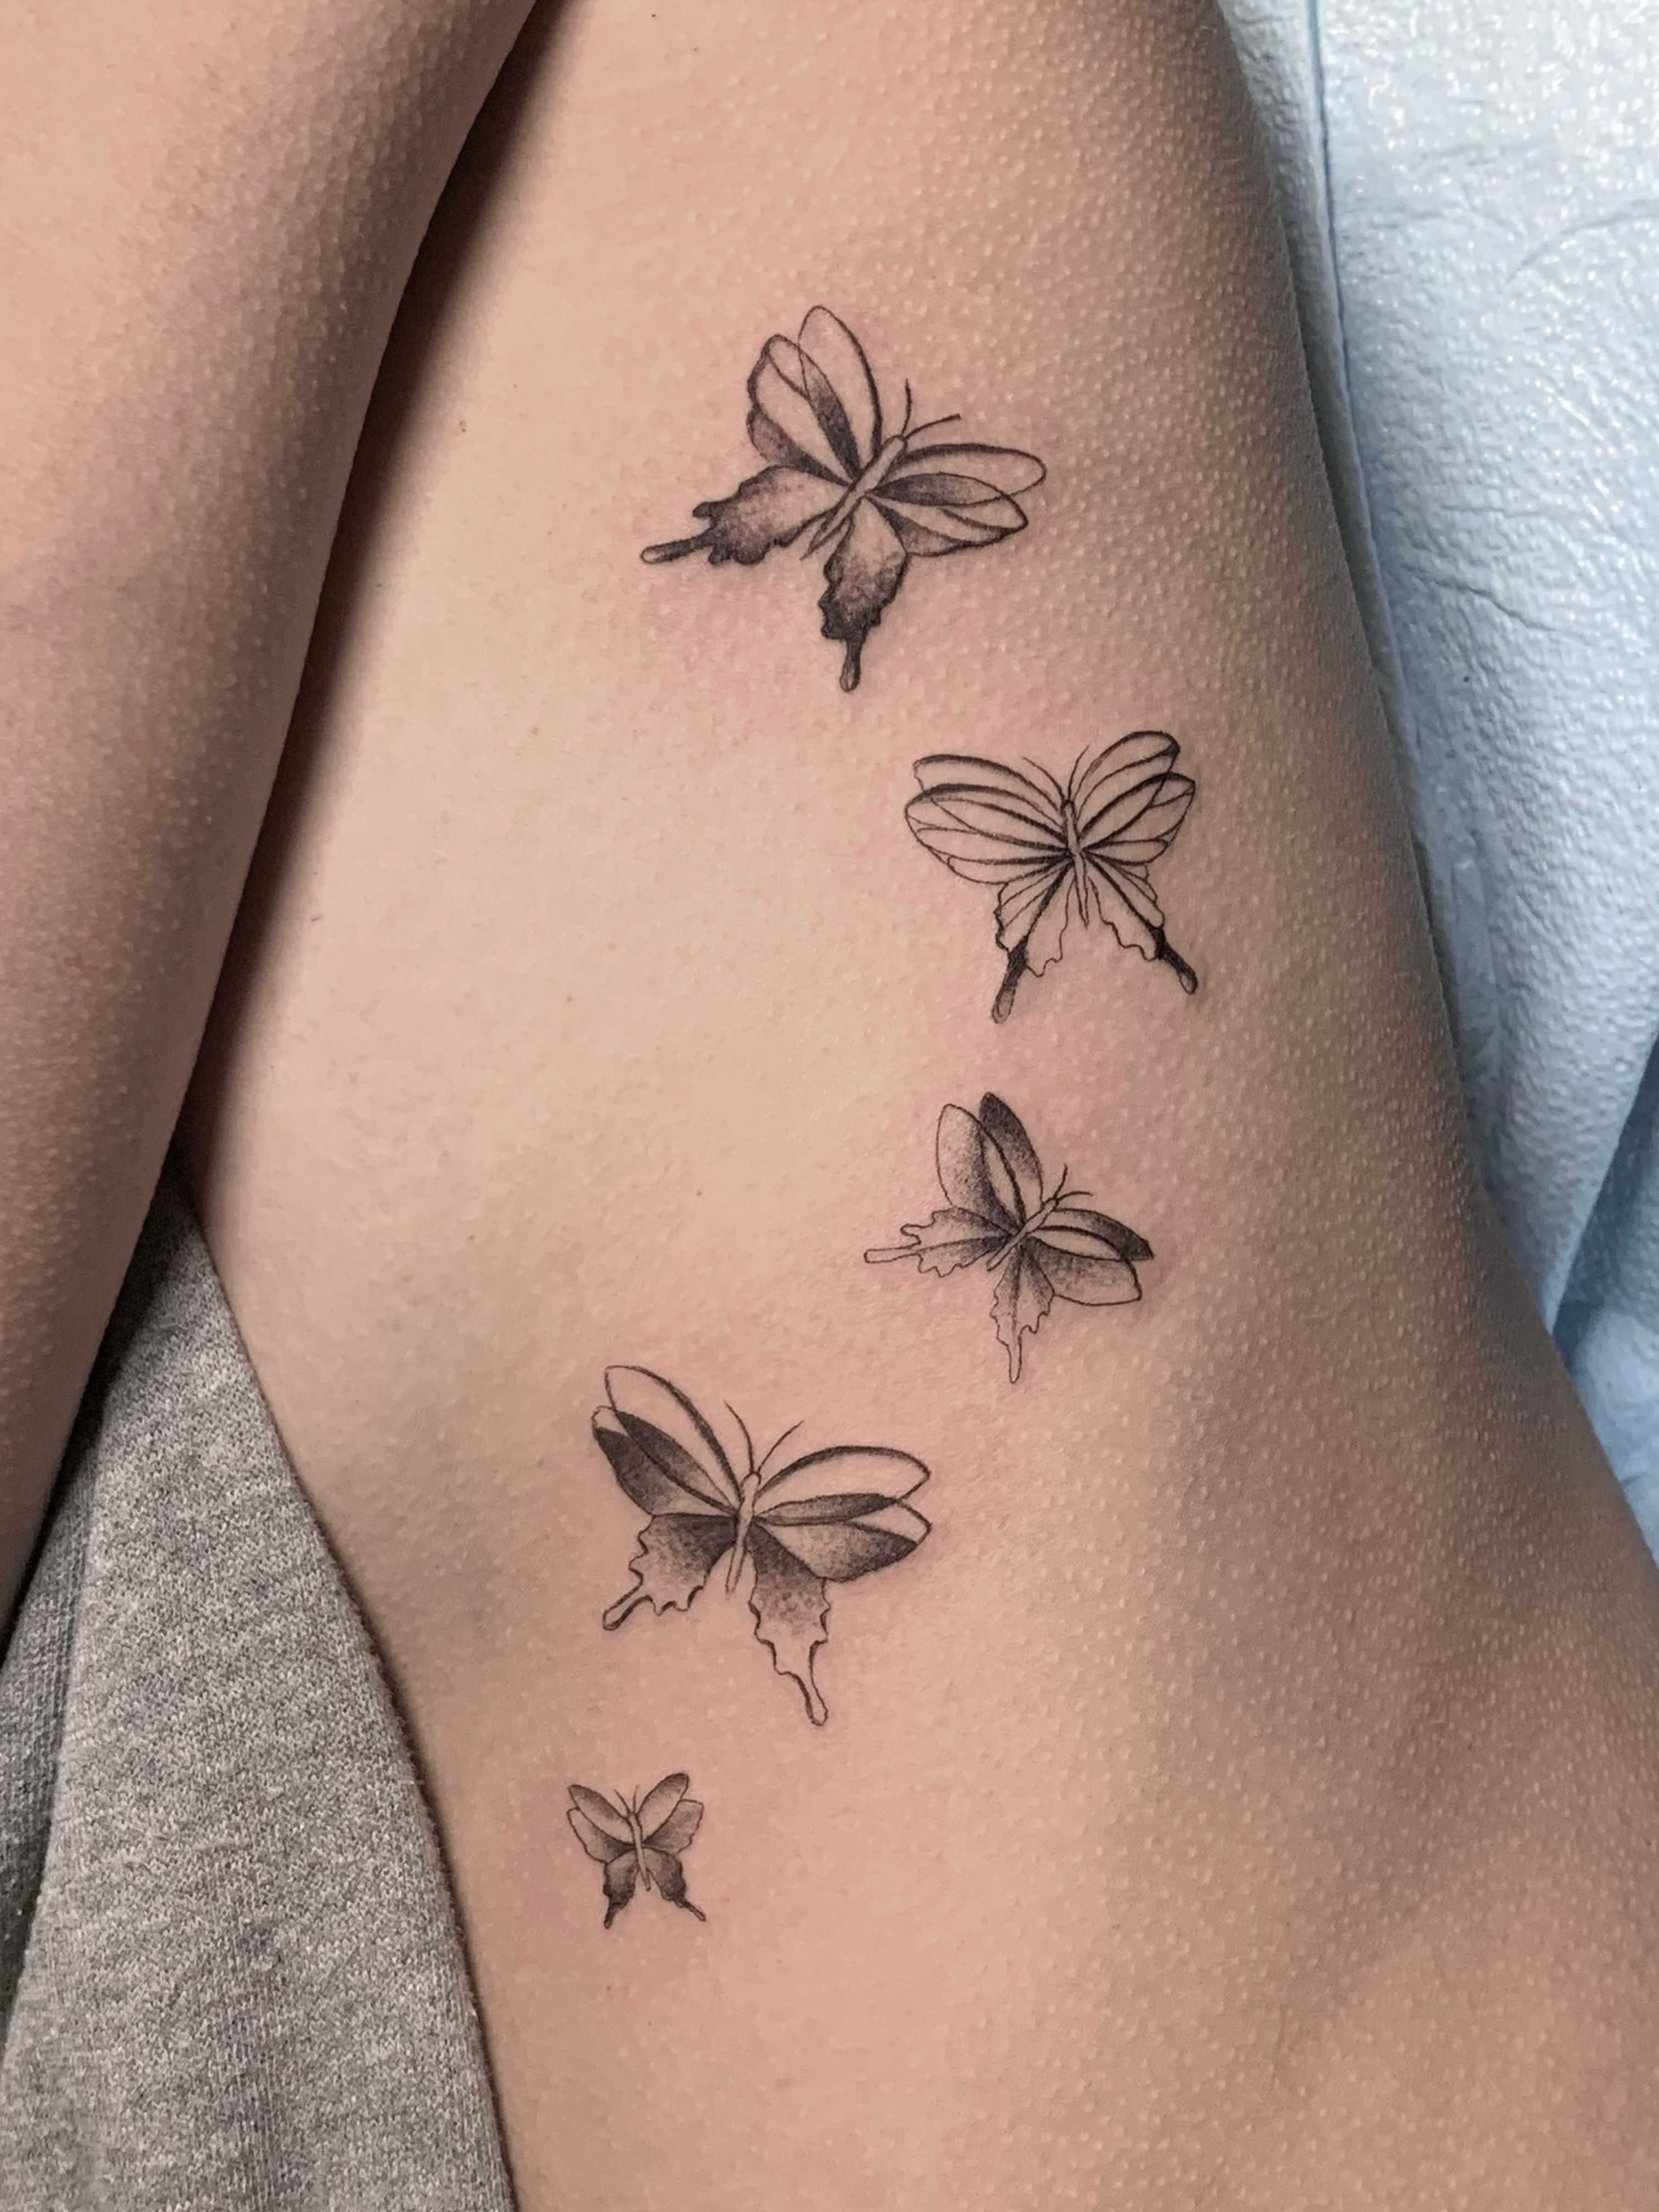 Minimalist butterfly tattoo on the shoulder blade